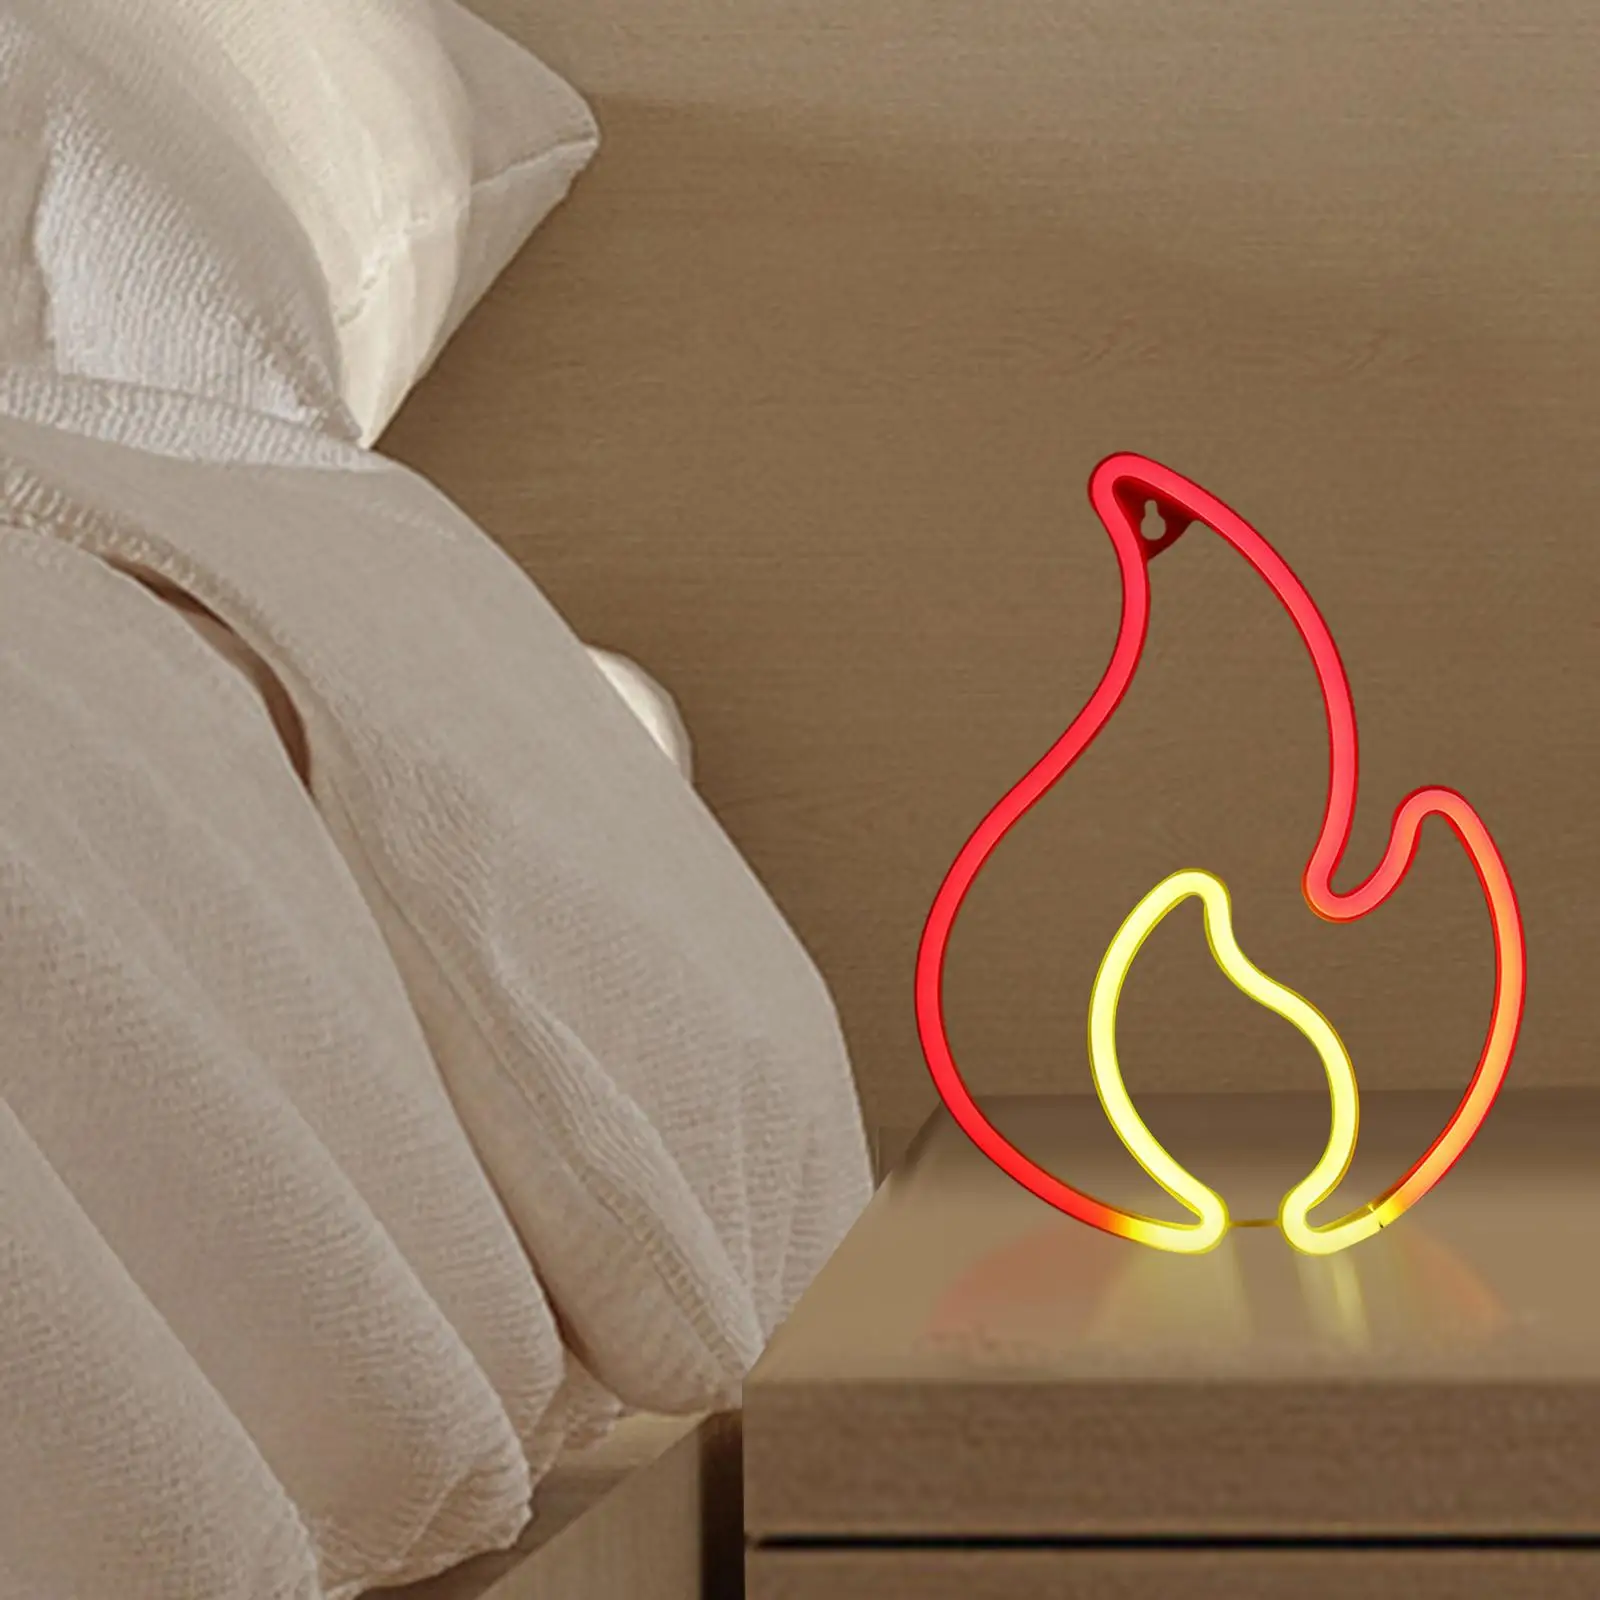 Flame Neon Sign Decor Decorative Neon Light Sign Light up Signs Night Lights for Party Indoor Outdoor Living Room Home